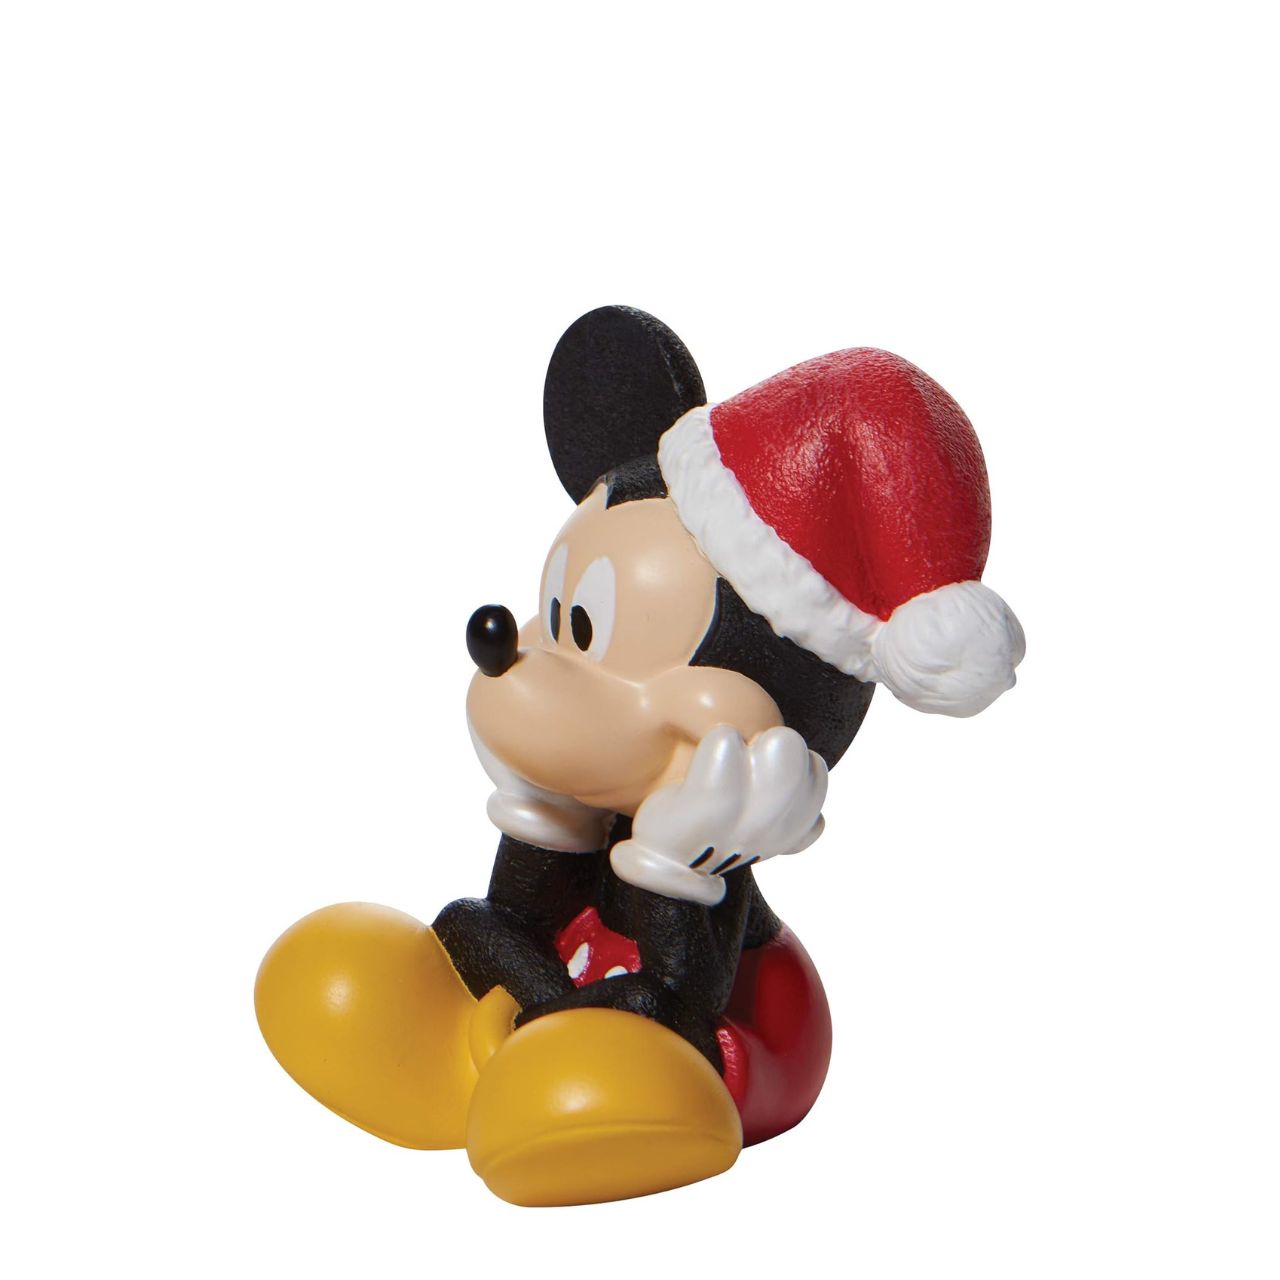 Department 56 Disney Christmas Mickey Mouse Figurine  Positively jolly, Mickey Mouse excitedly sits in this beautiful Christmas figure from Disney. With a song in his heart and holly in his hat, Mickey prepares to spend the season smiling. This is one mouse that won't be silent throughout the house.